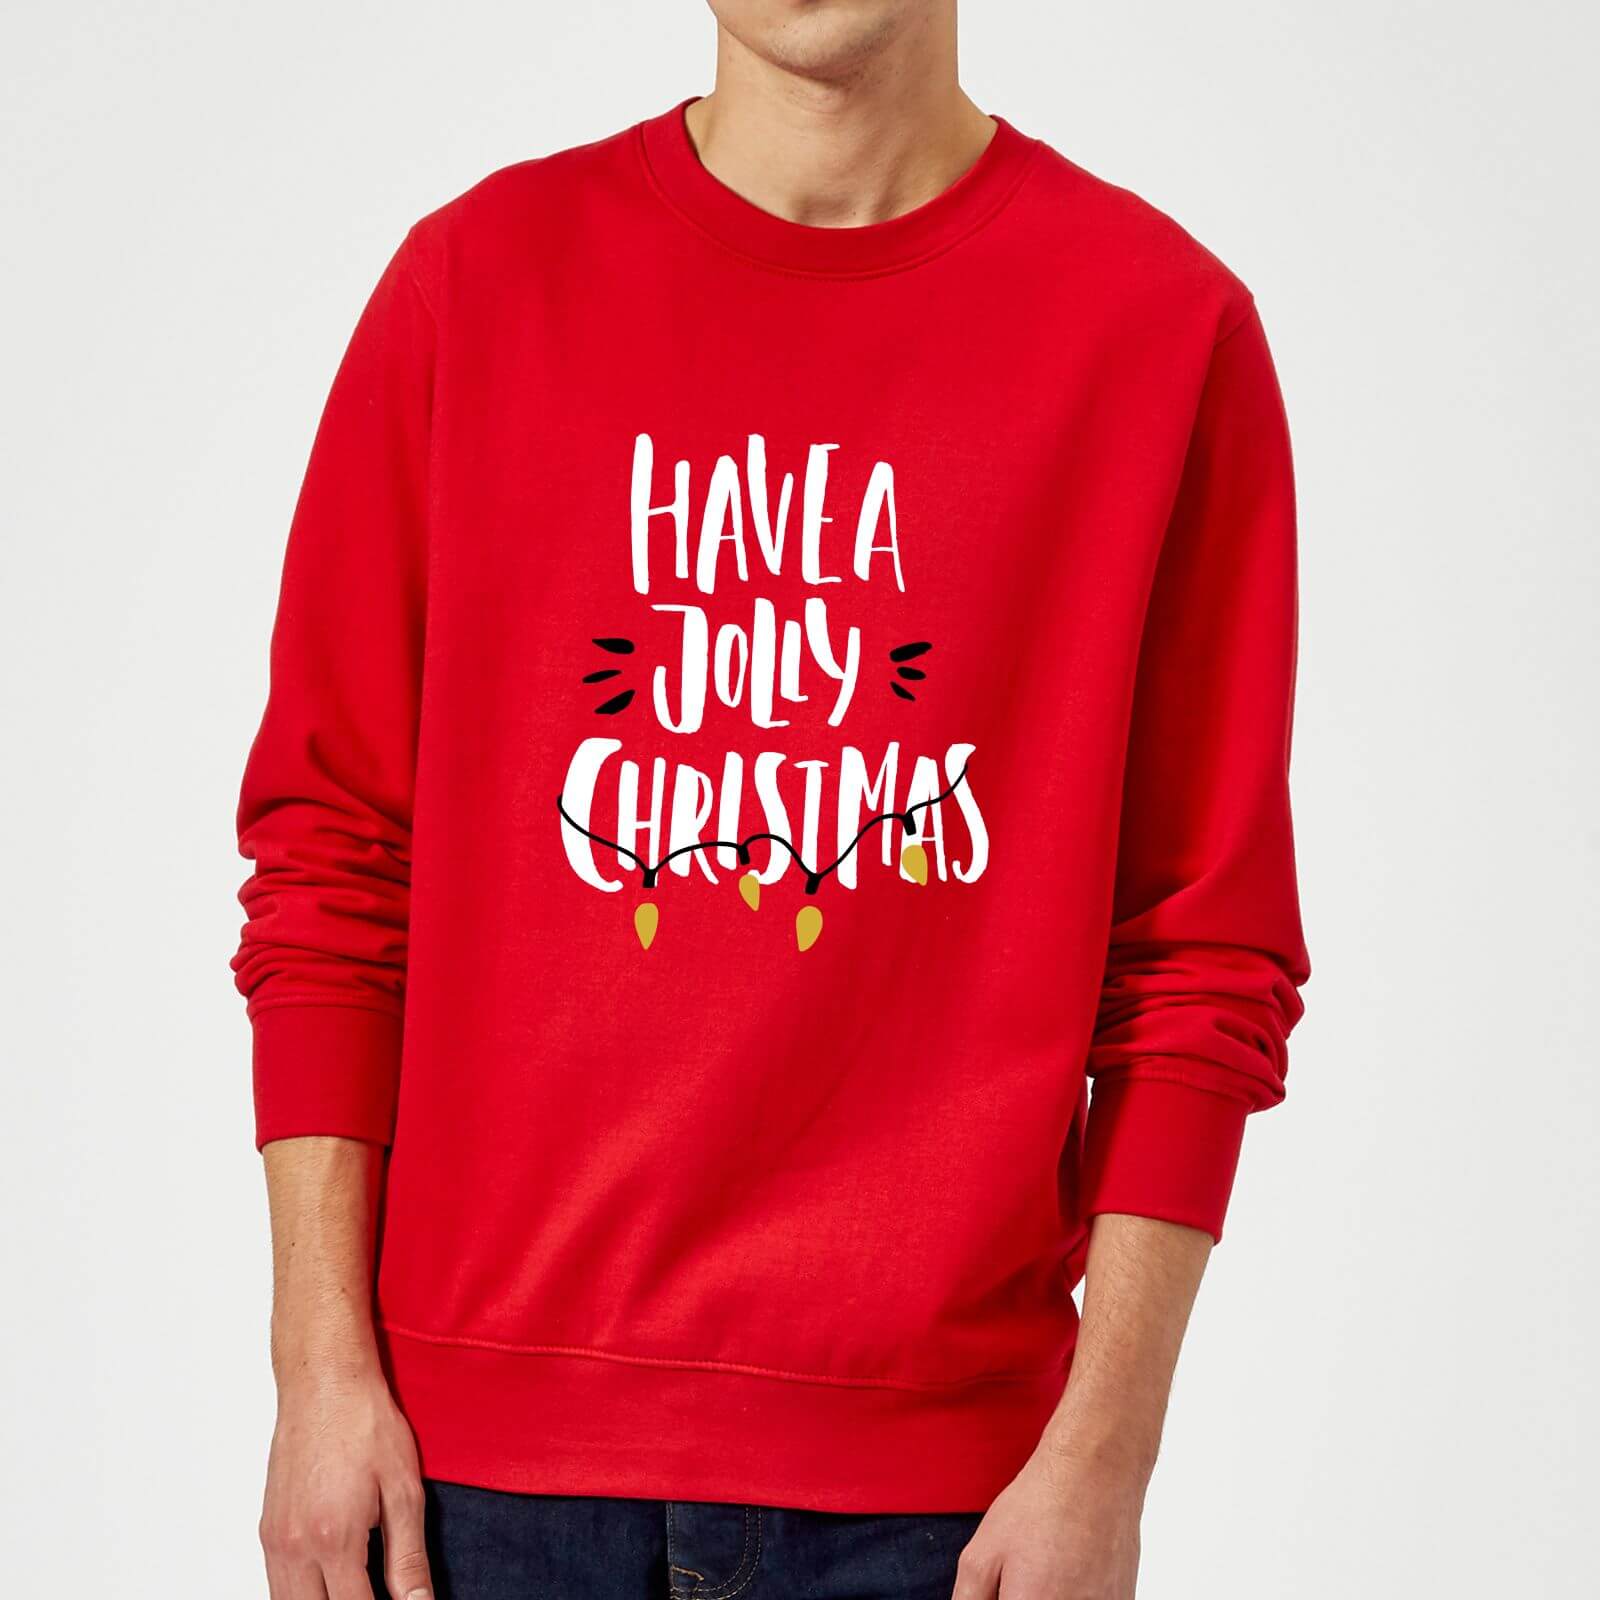 Have a Jolly Christmas Sweatshirt - Red - M - Red